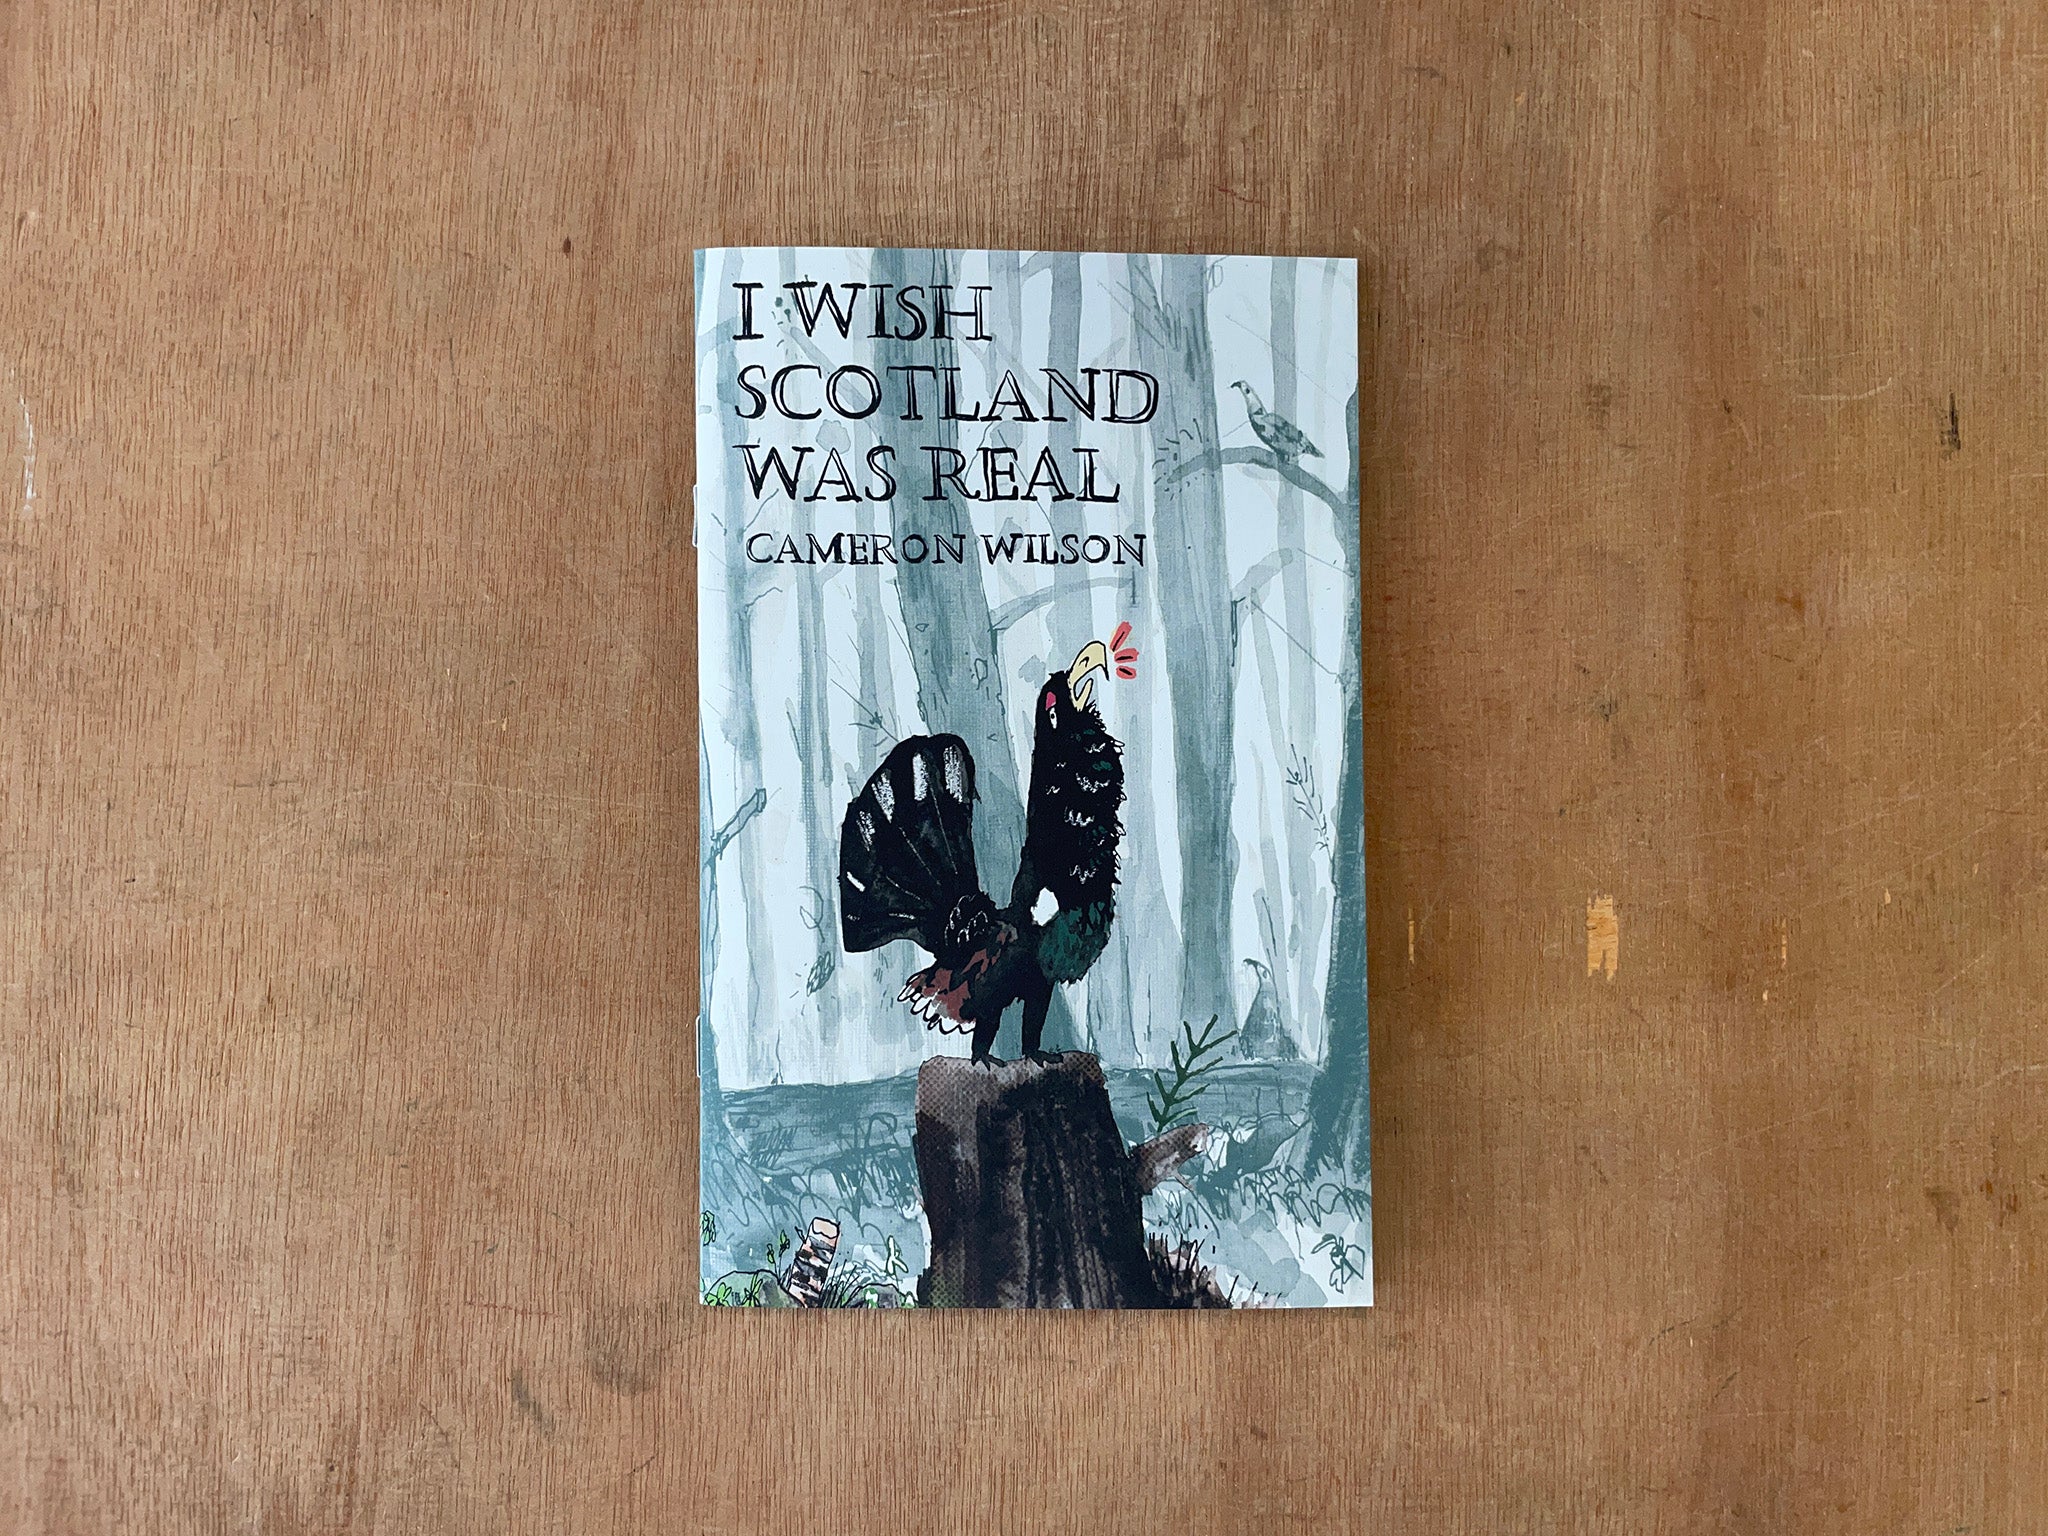 I WISH SCOTLAND WAS REAL by Cameron Wilson